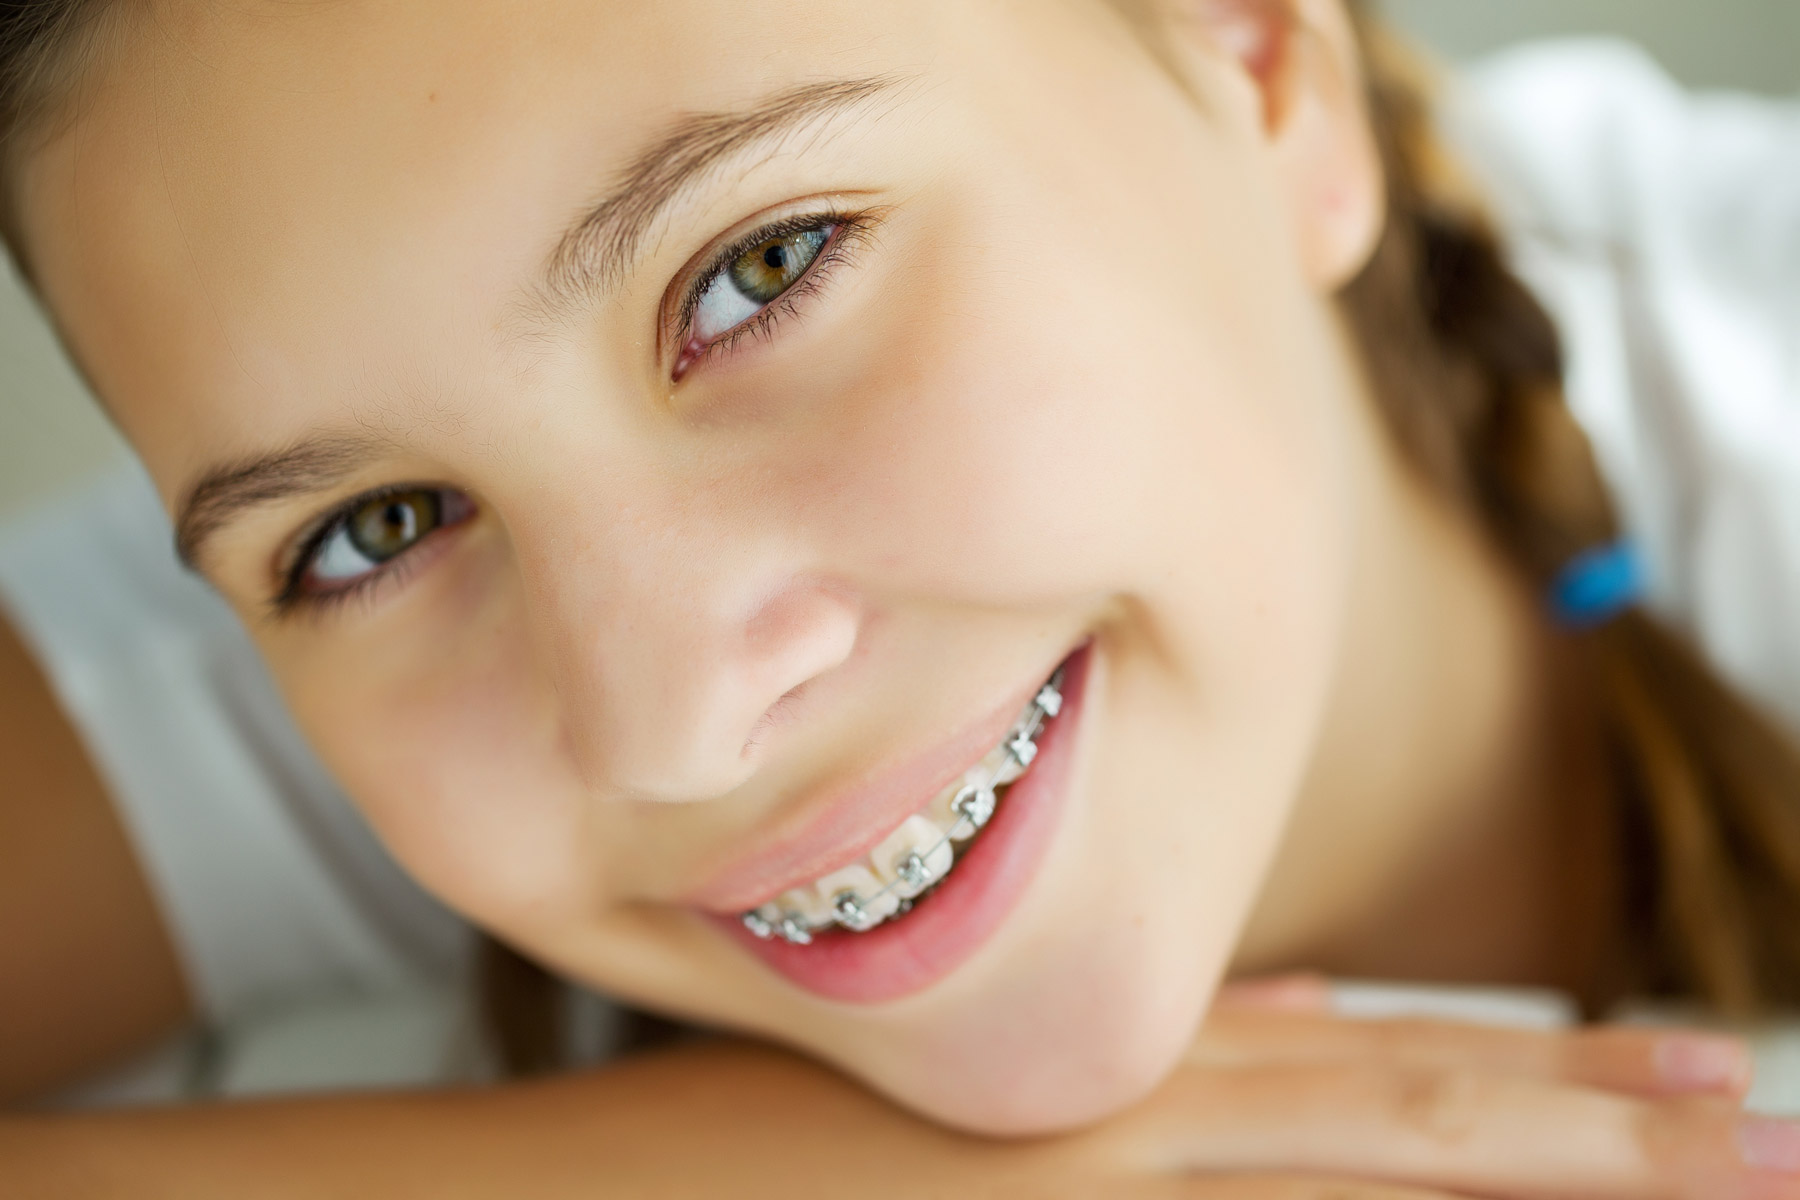 closeup picture of a girl with braces smiling